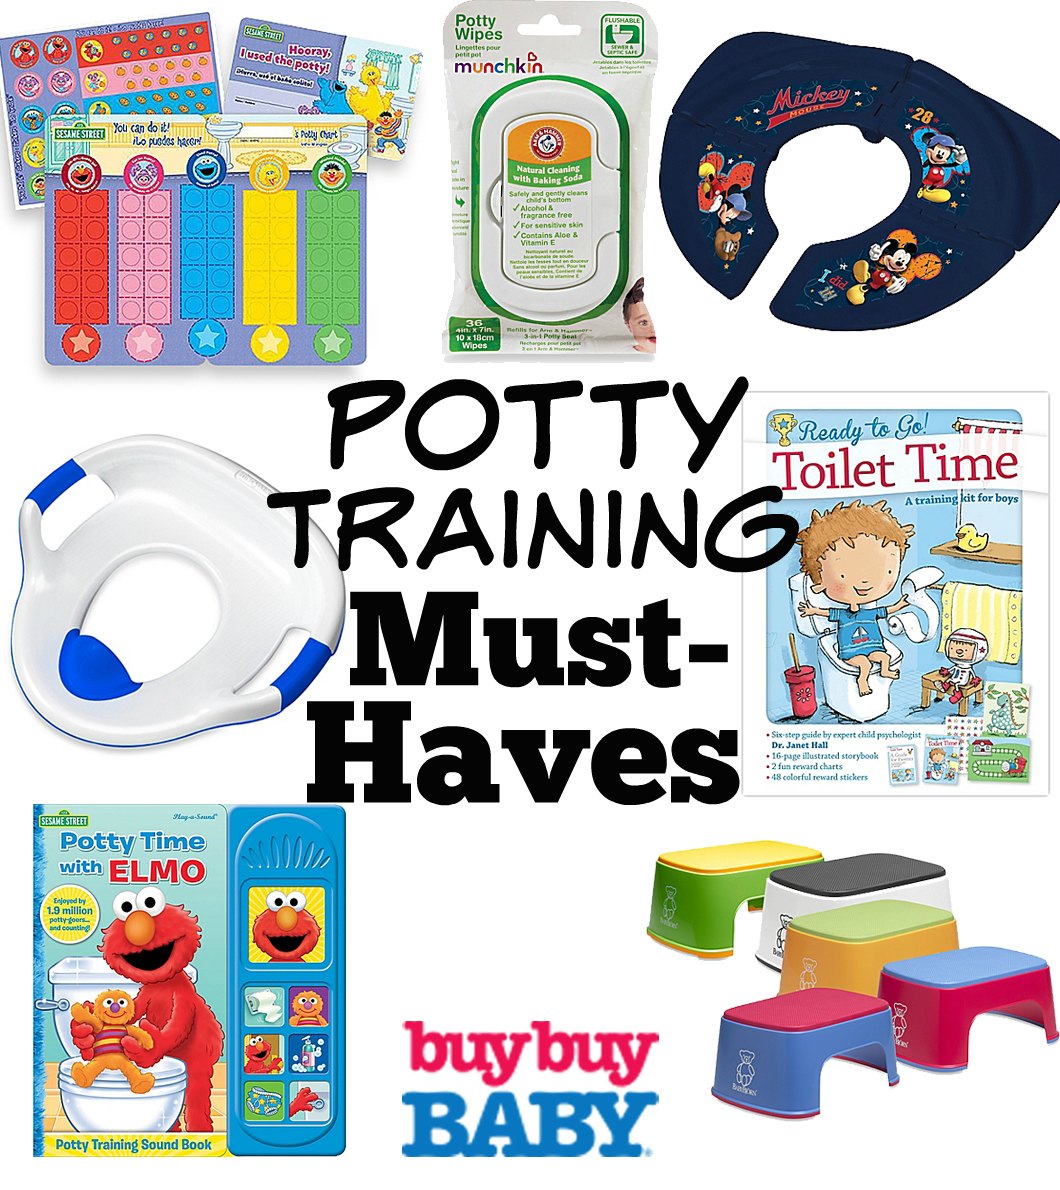 Potty Training Must-Haves